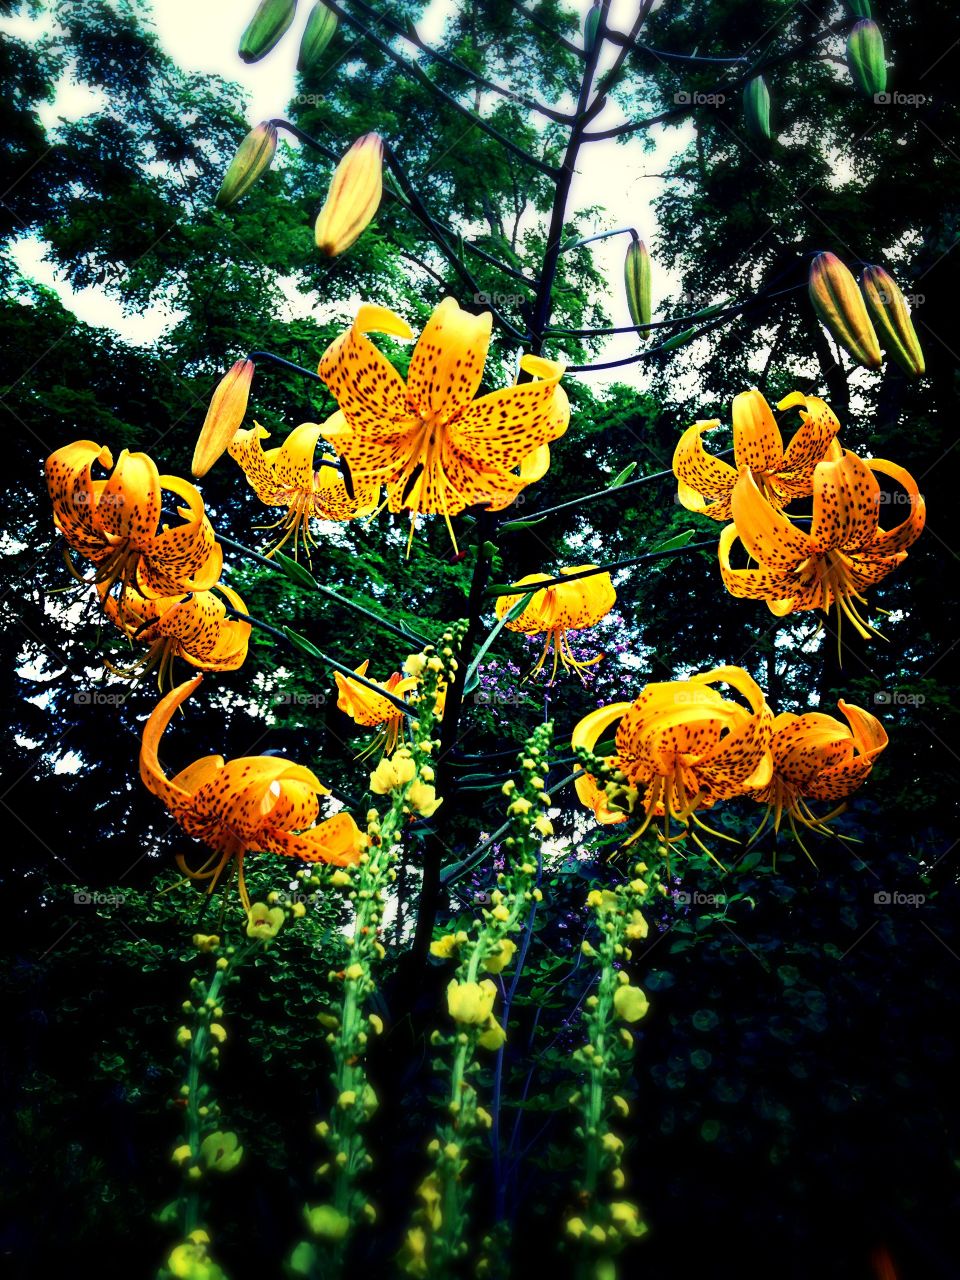 Tiger Lilies. Lilies in bloom in my garden